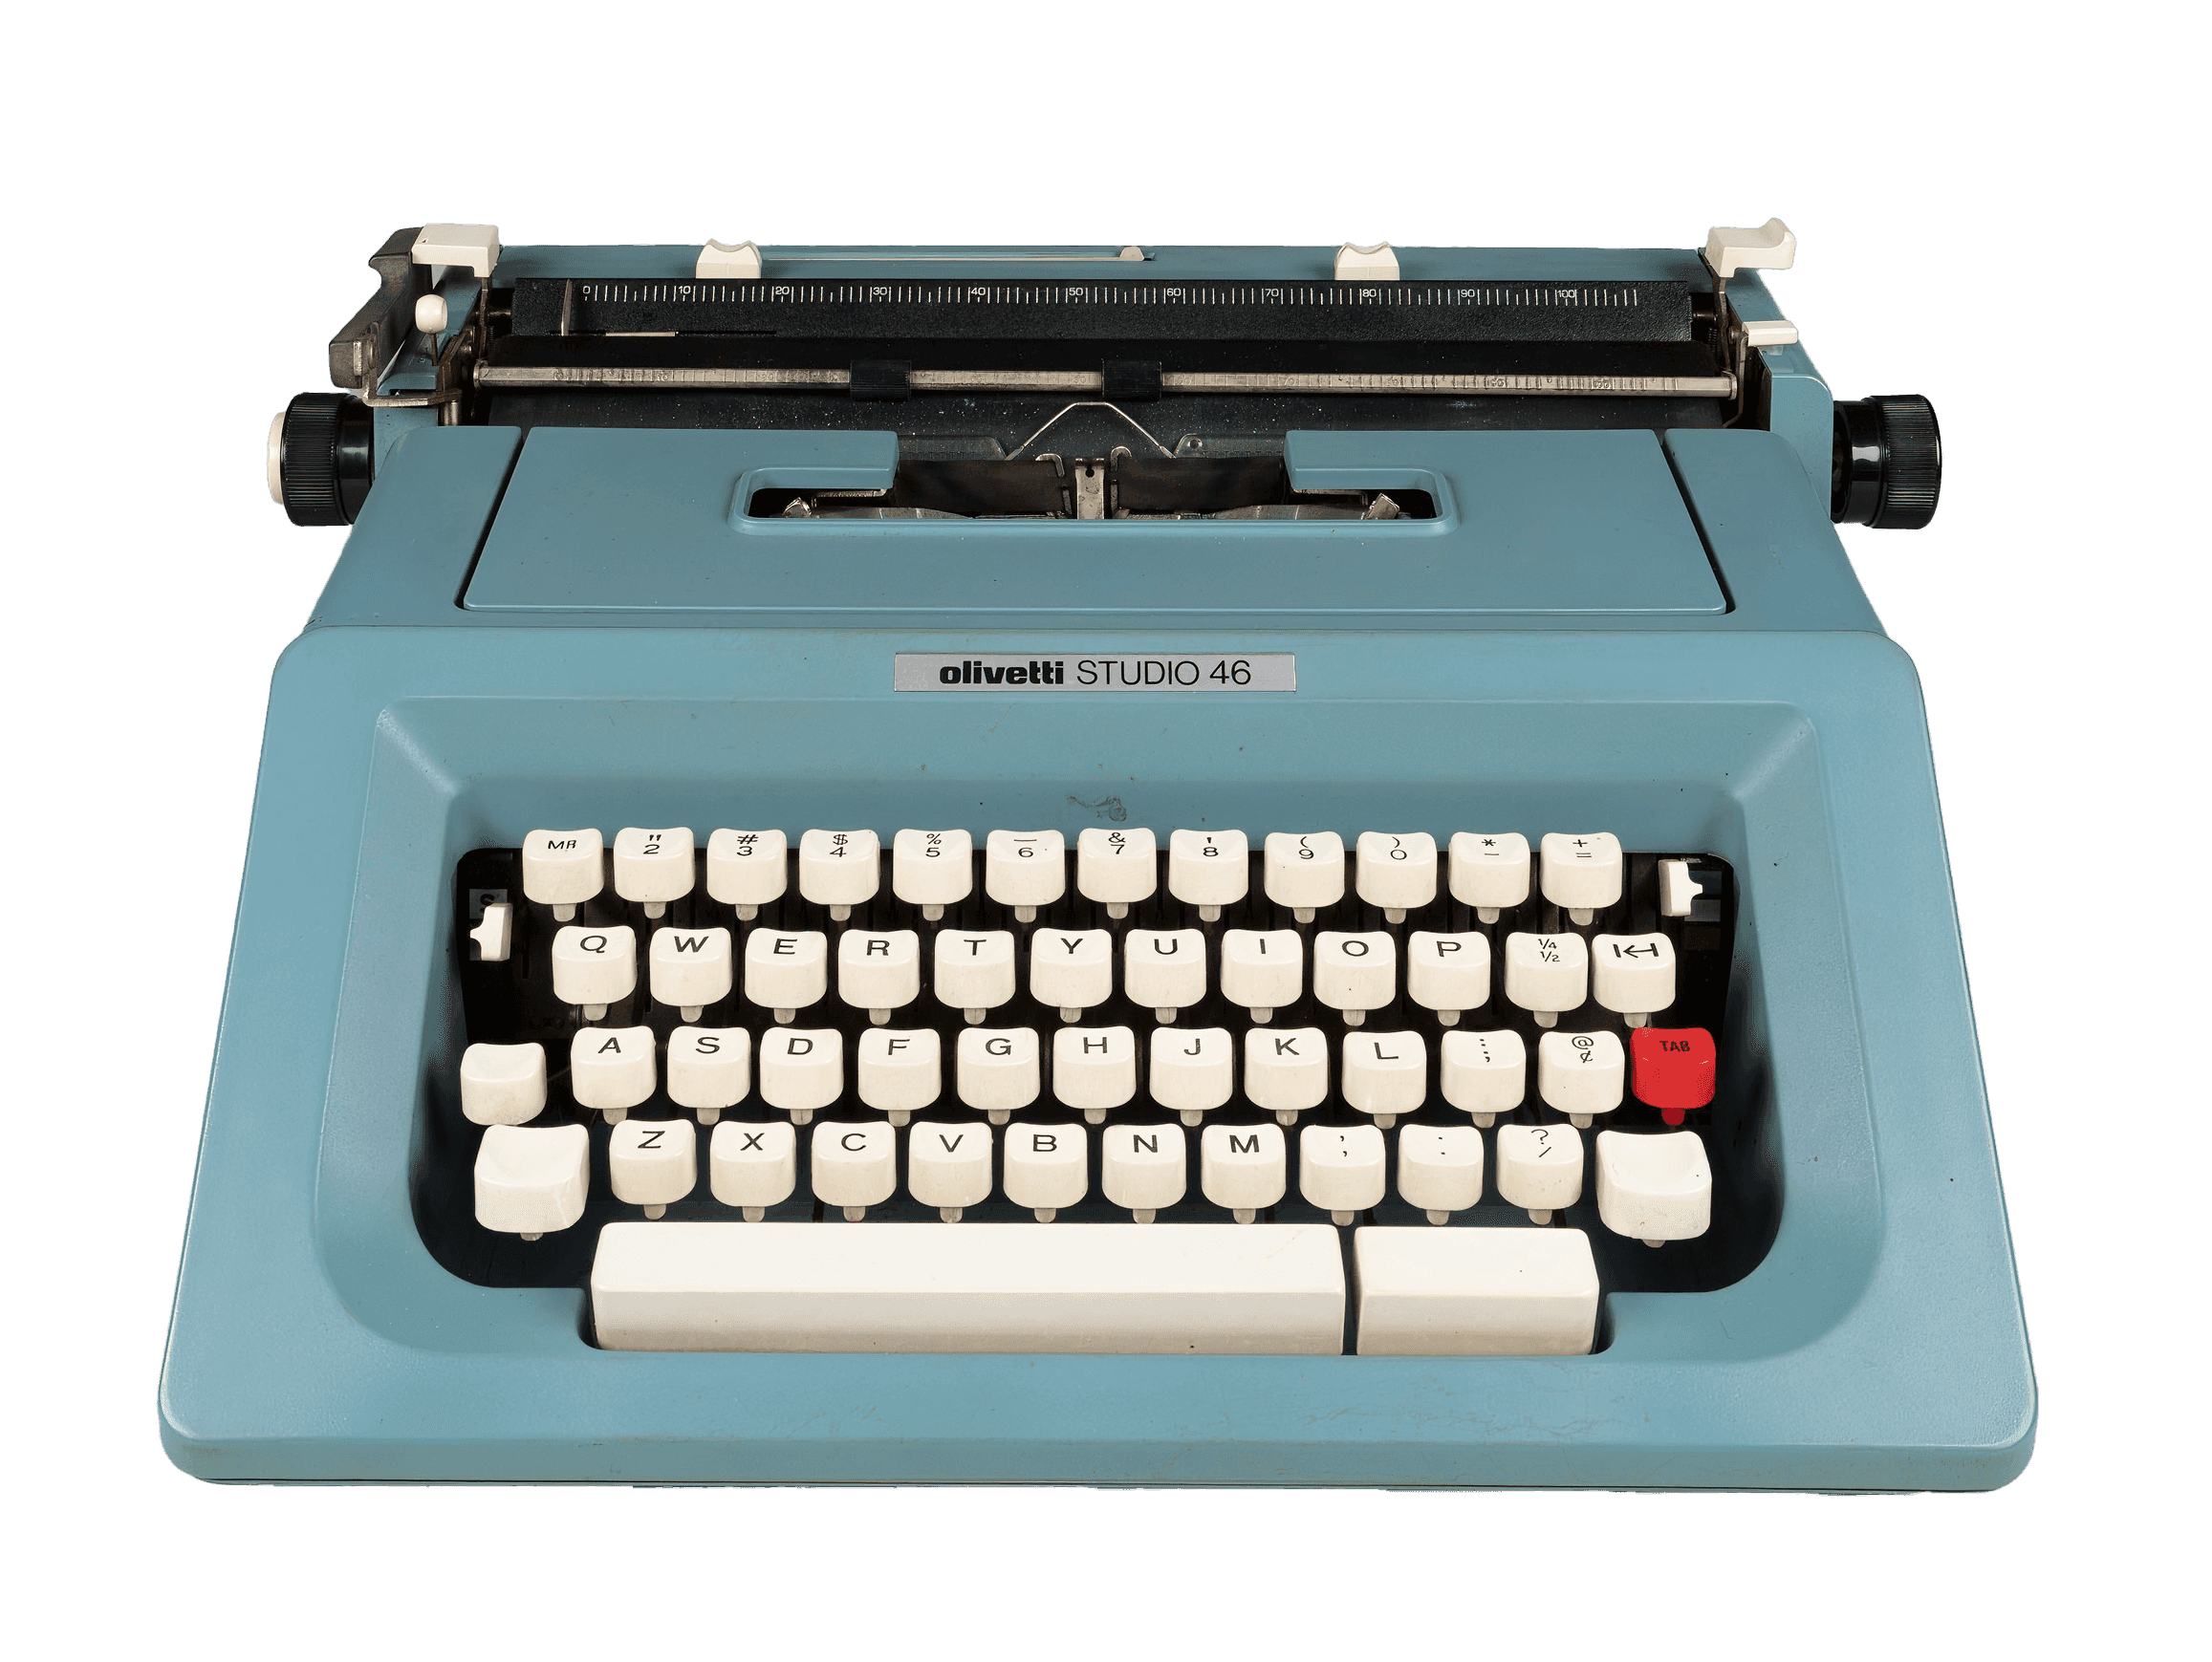 The Olivetti Studio 46 Typewriter has a teal blue body and white keys, except for one red key on the right..